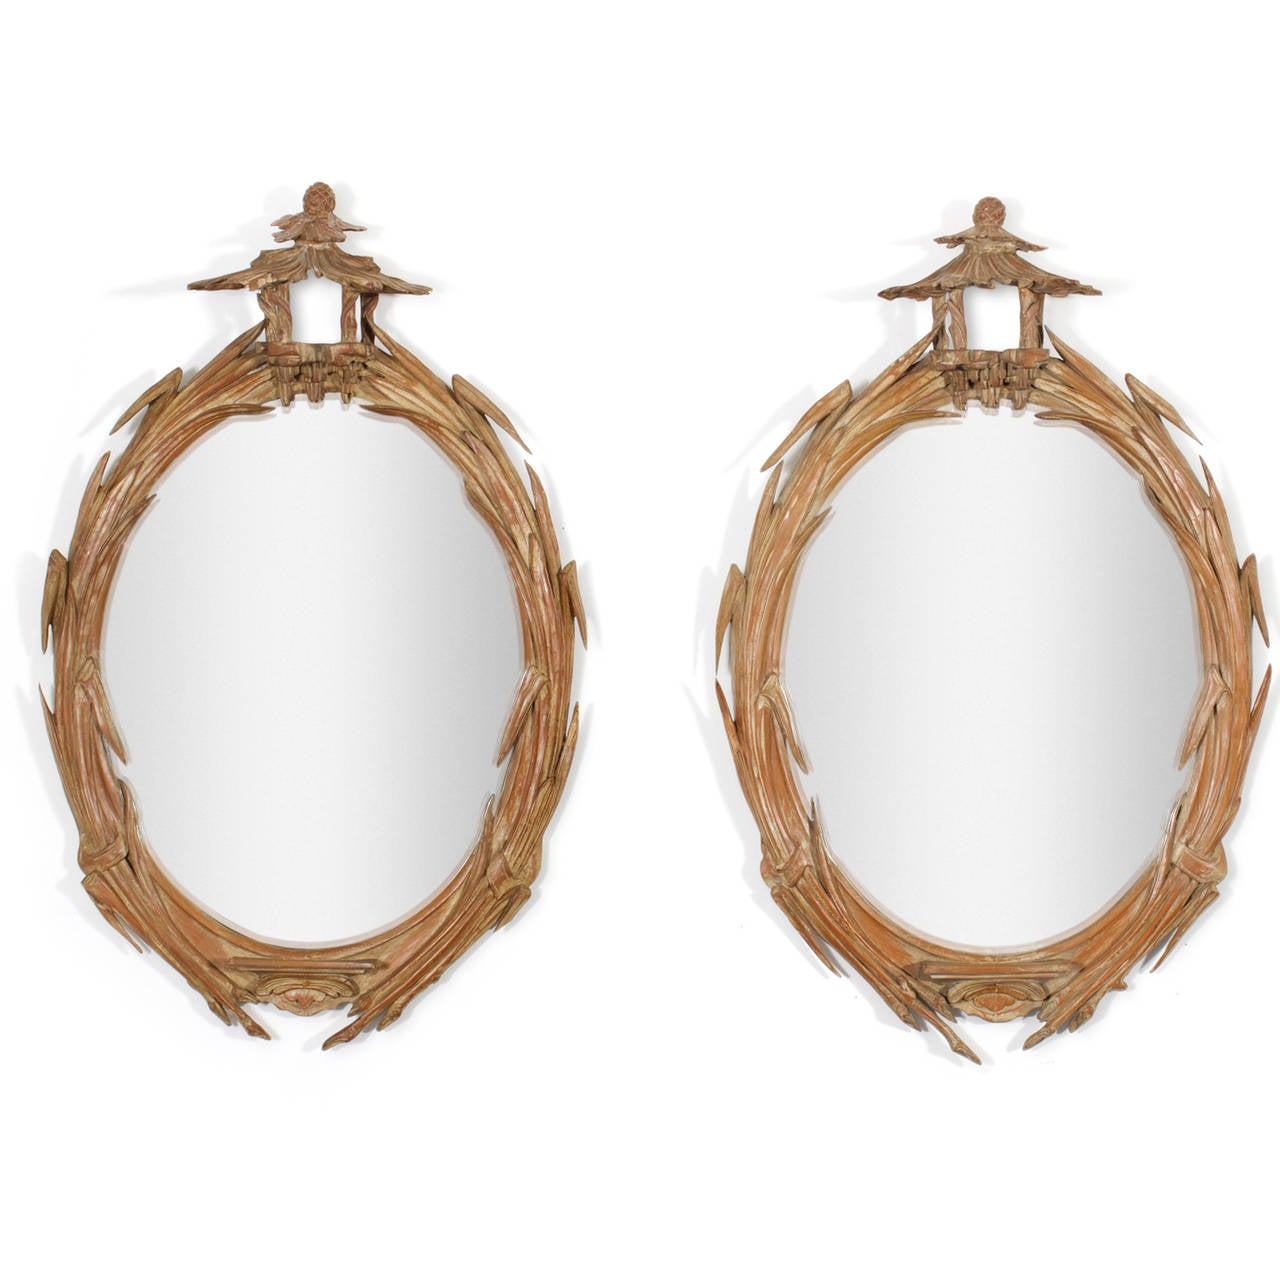 Unusual, mid century pair of Italian carved wood mirrors featuring reed and leaf motif oval frames with whimsical pagoda tops and pineapple finials all in a highlighted white wash finish.